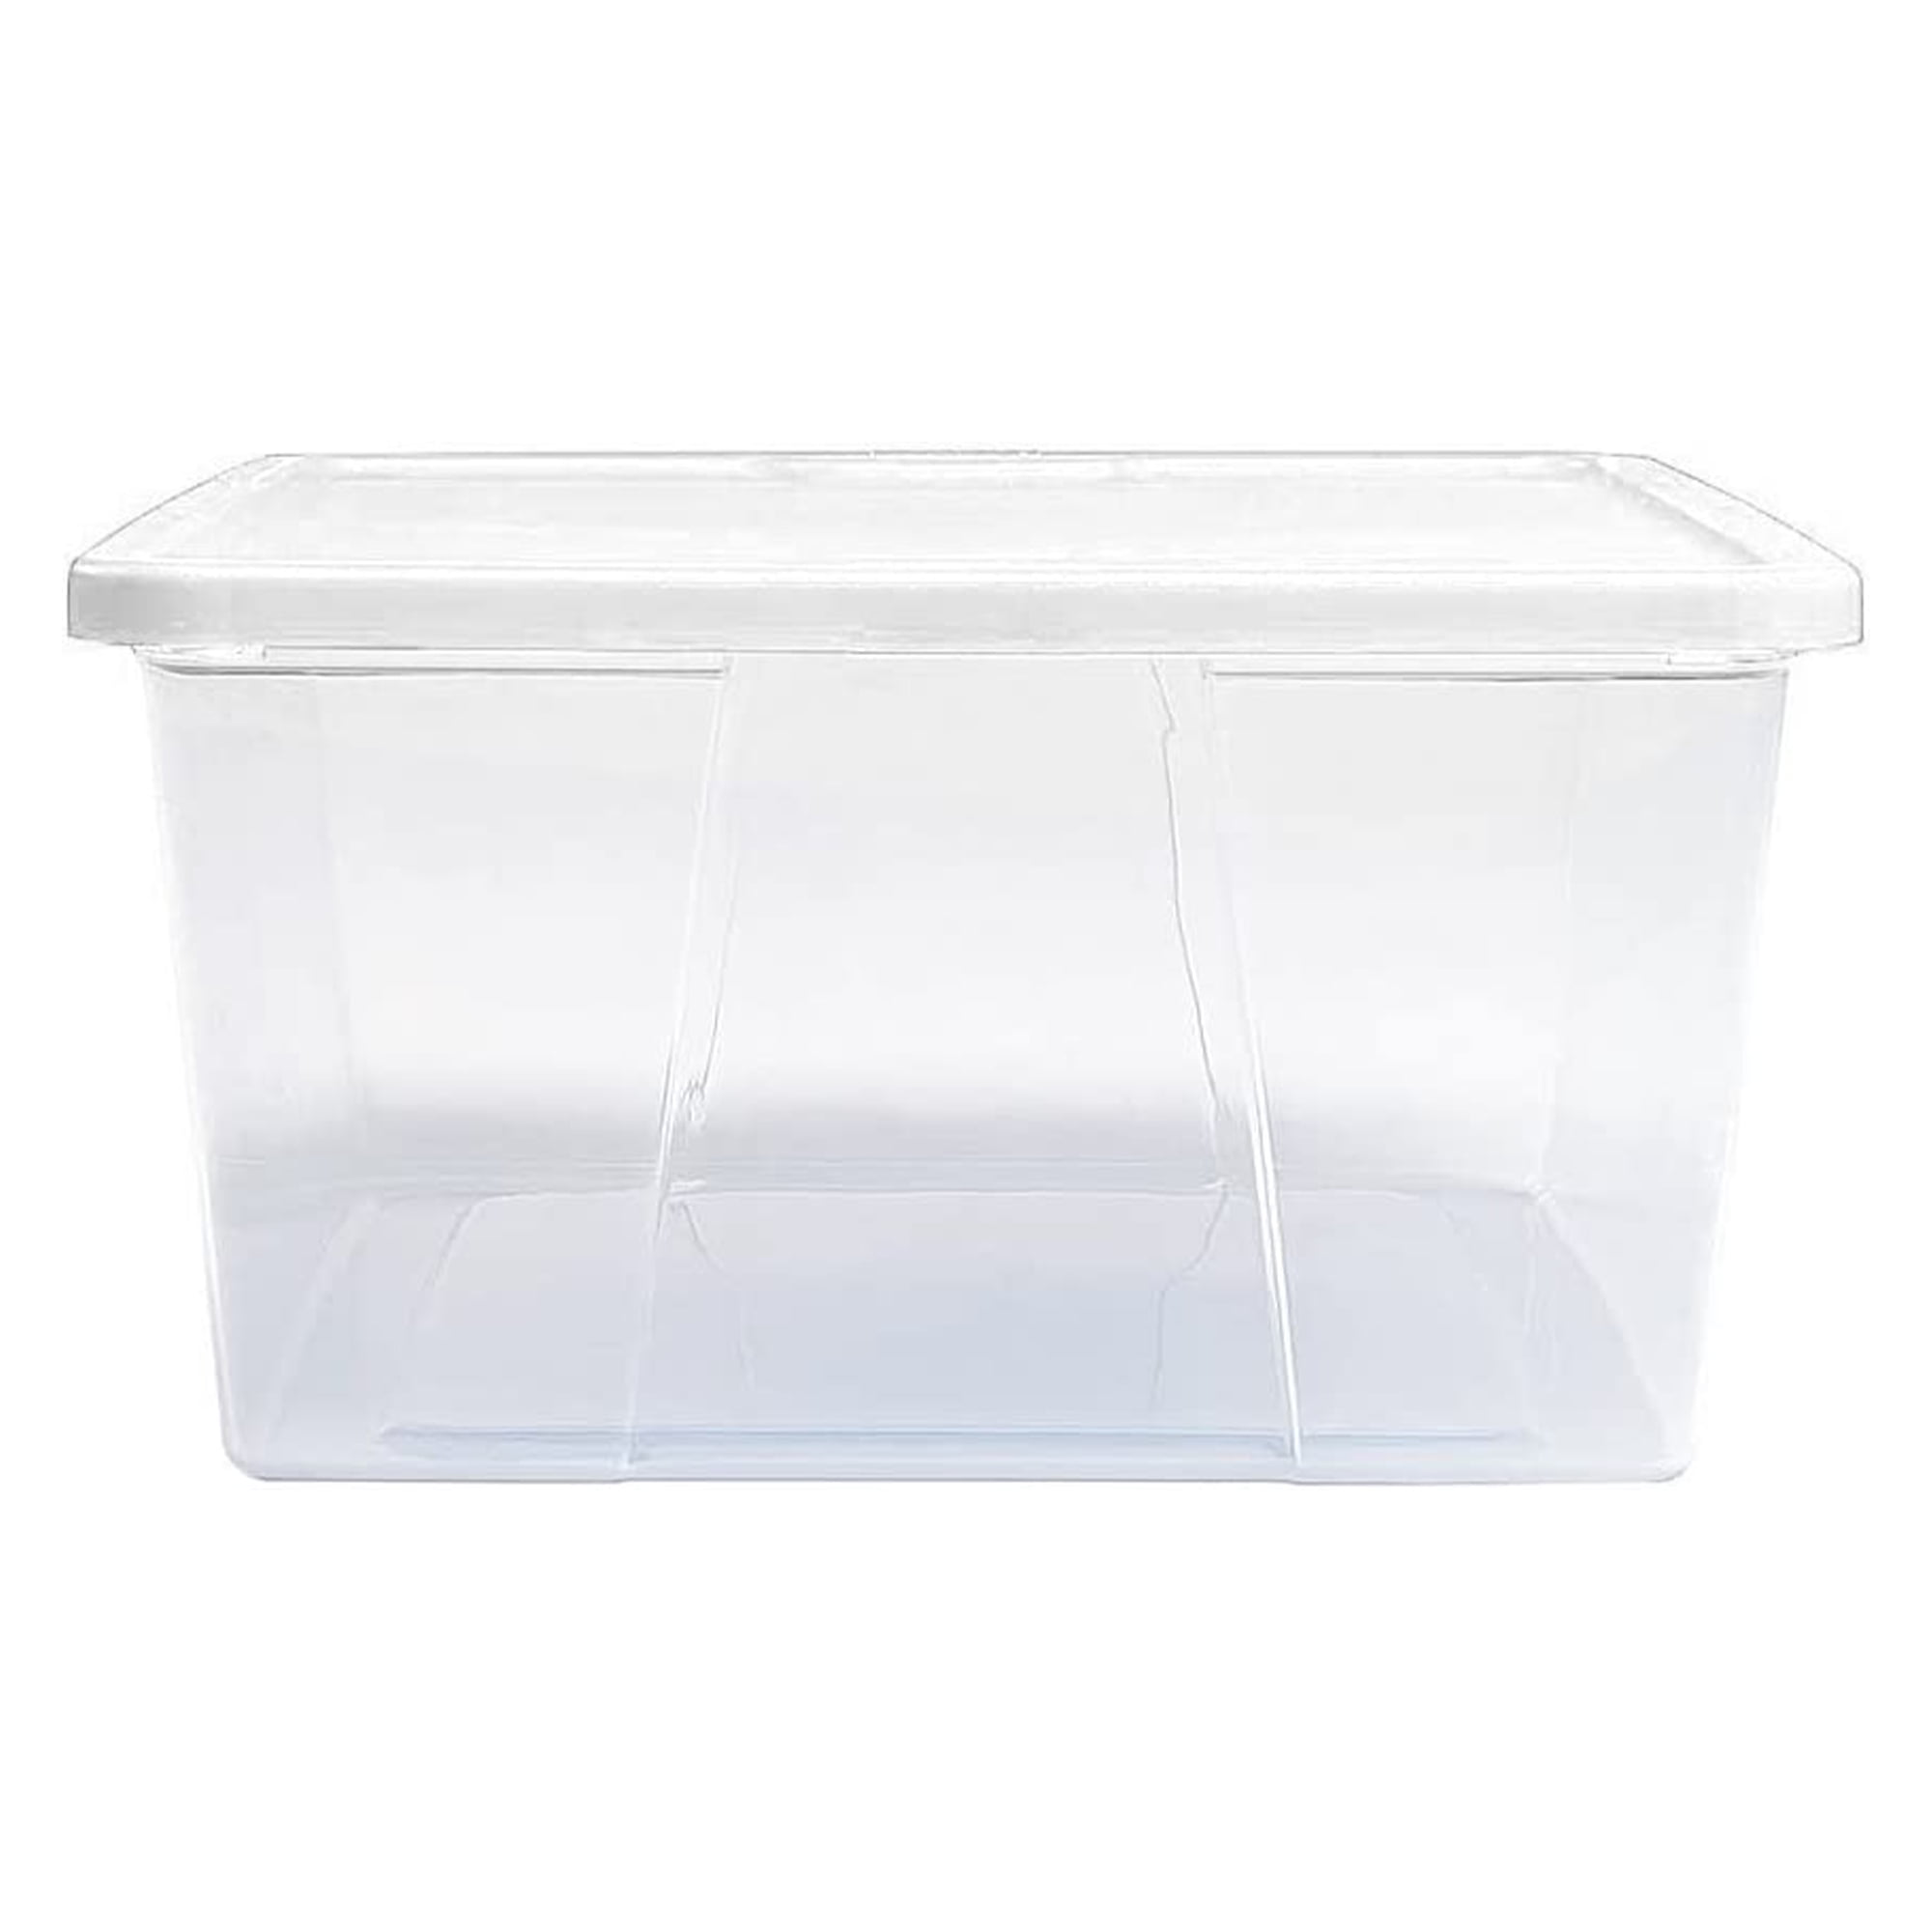 Homz Snaplock 41-Quart Plastic Multipurpose Stackable Storage Container  Bins with Blue Snaplock Lid for Home and Office Organization, Clear (2 Pack)